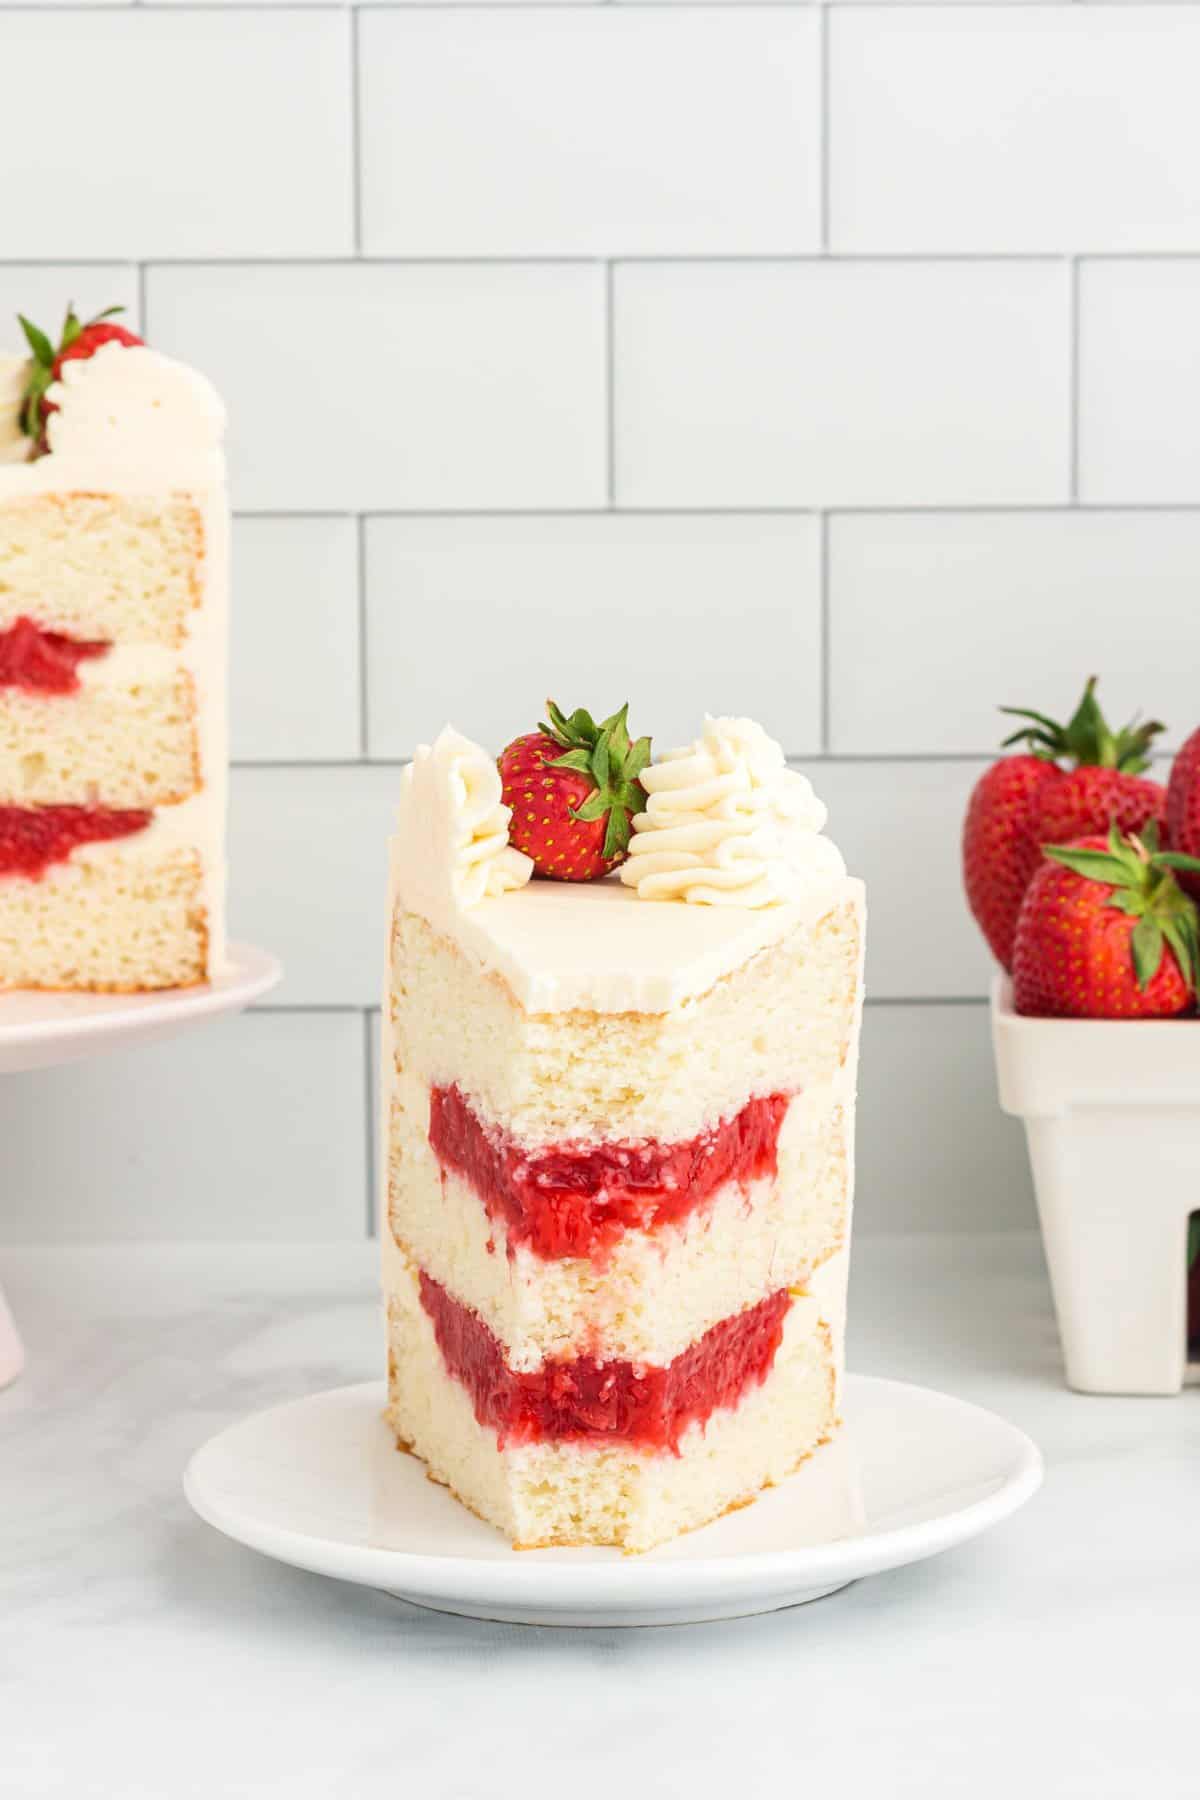 Slice of cake on a white plate with a bowl of strawberries in the corner. 